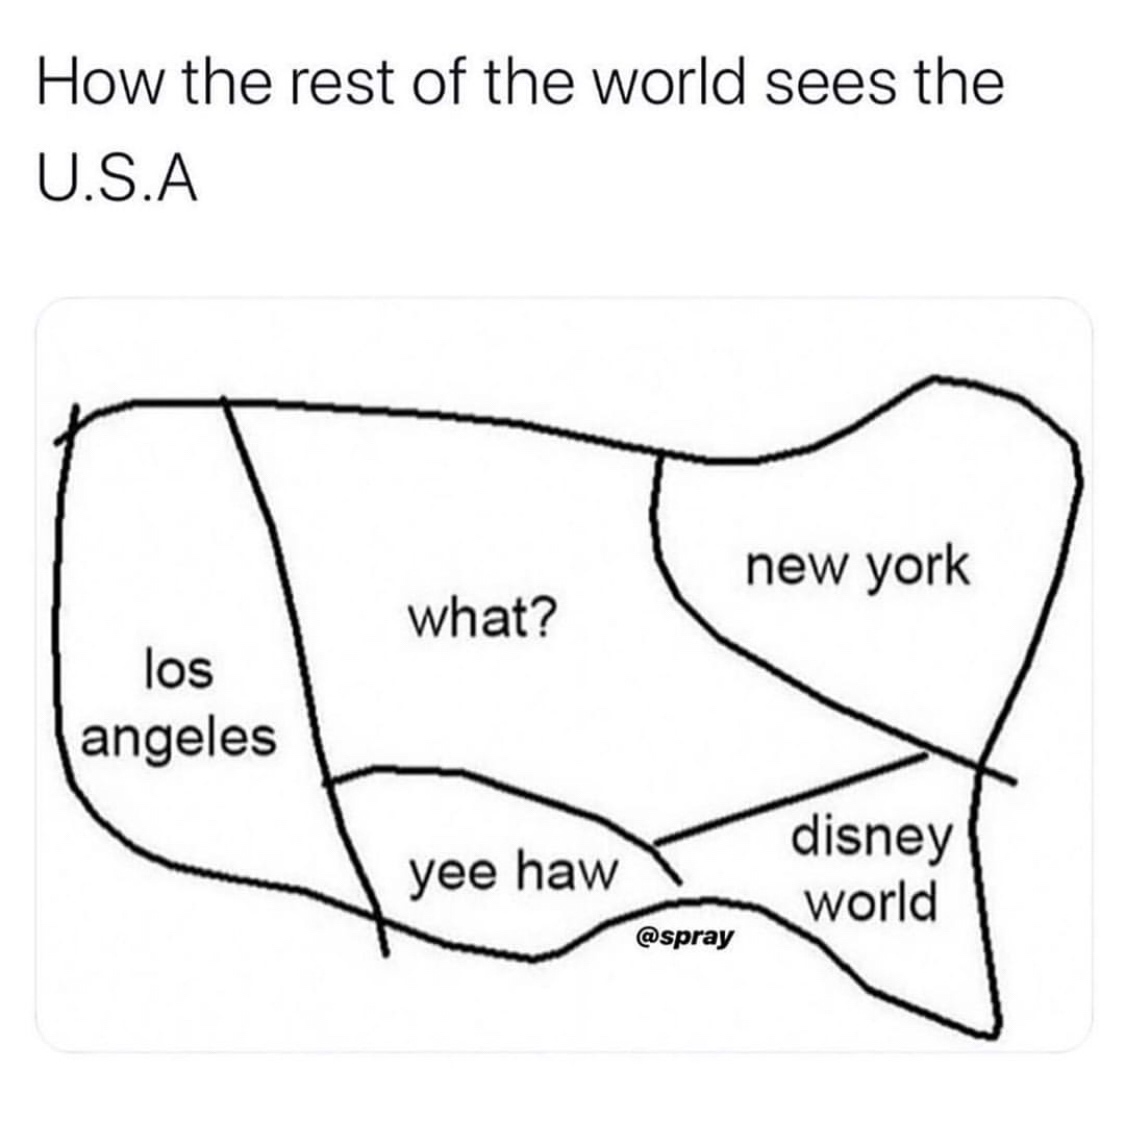 diagram - How the rest of the world sees the U.S.A new york what? los angeles yee haw disney world